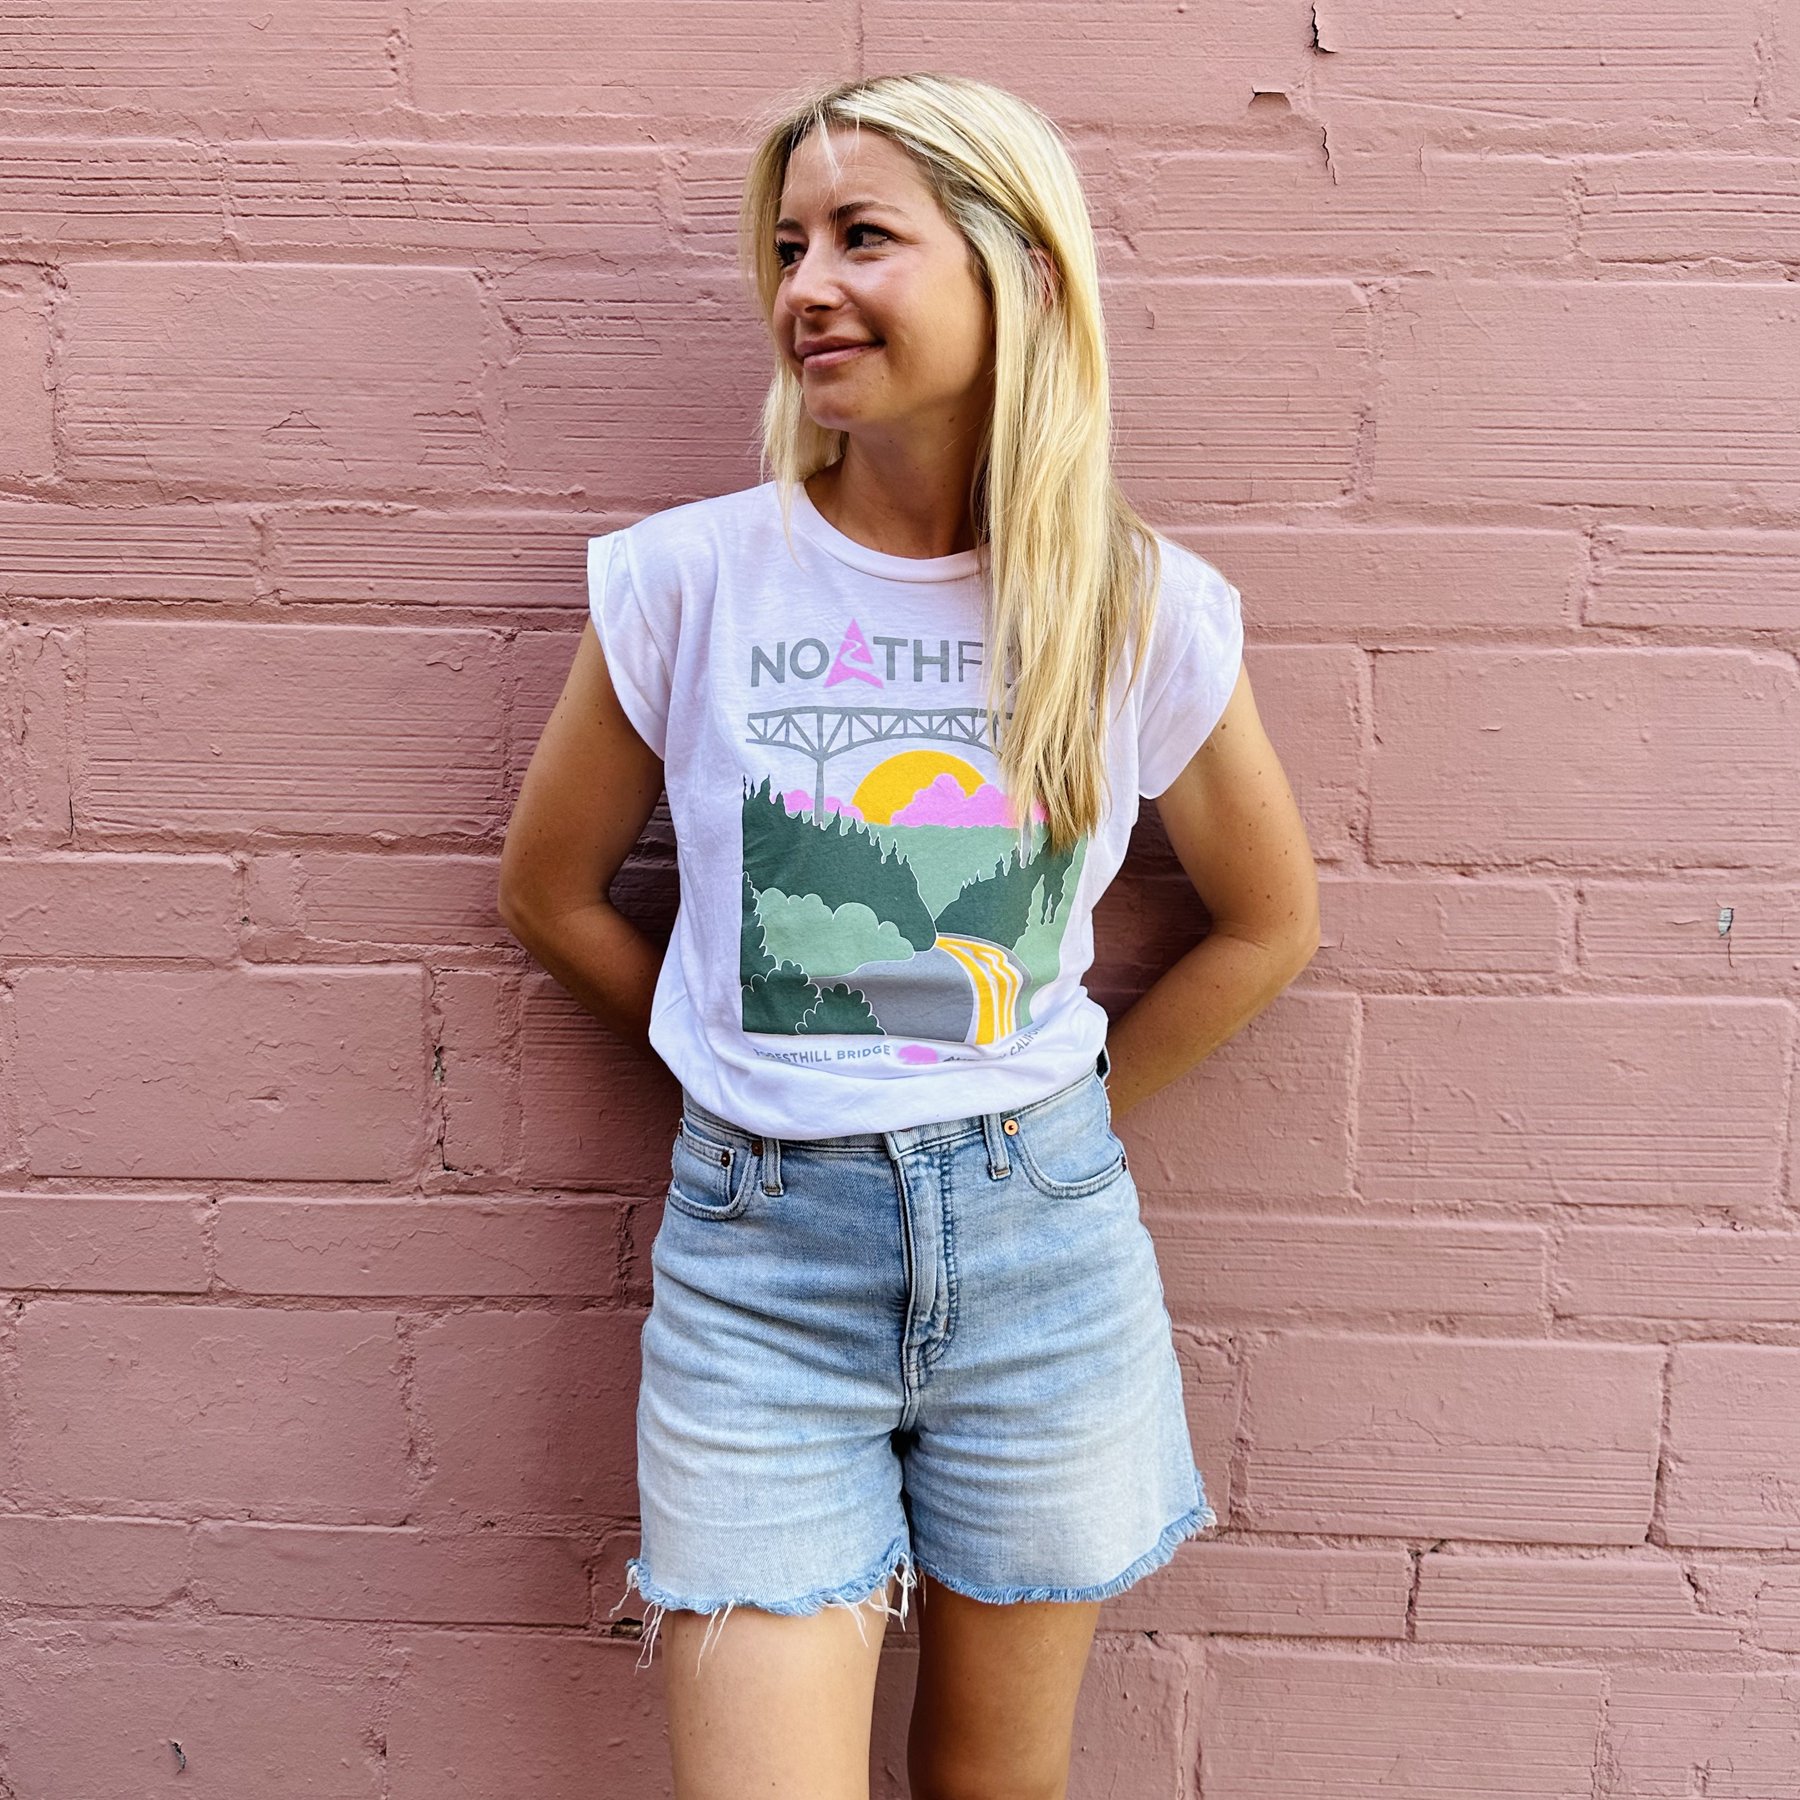 This Forest Hill Bridge shirt also comes in gray for those of you who are afraid to wear white. 😉

#northforkclothing #foresthillca #foresthillbridge #foresthillbridgeca #placercounty #auburnca #visitplacercounty